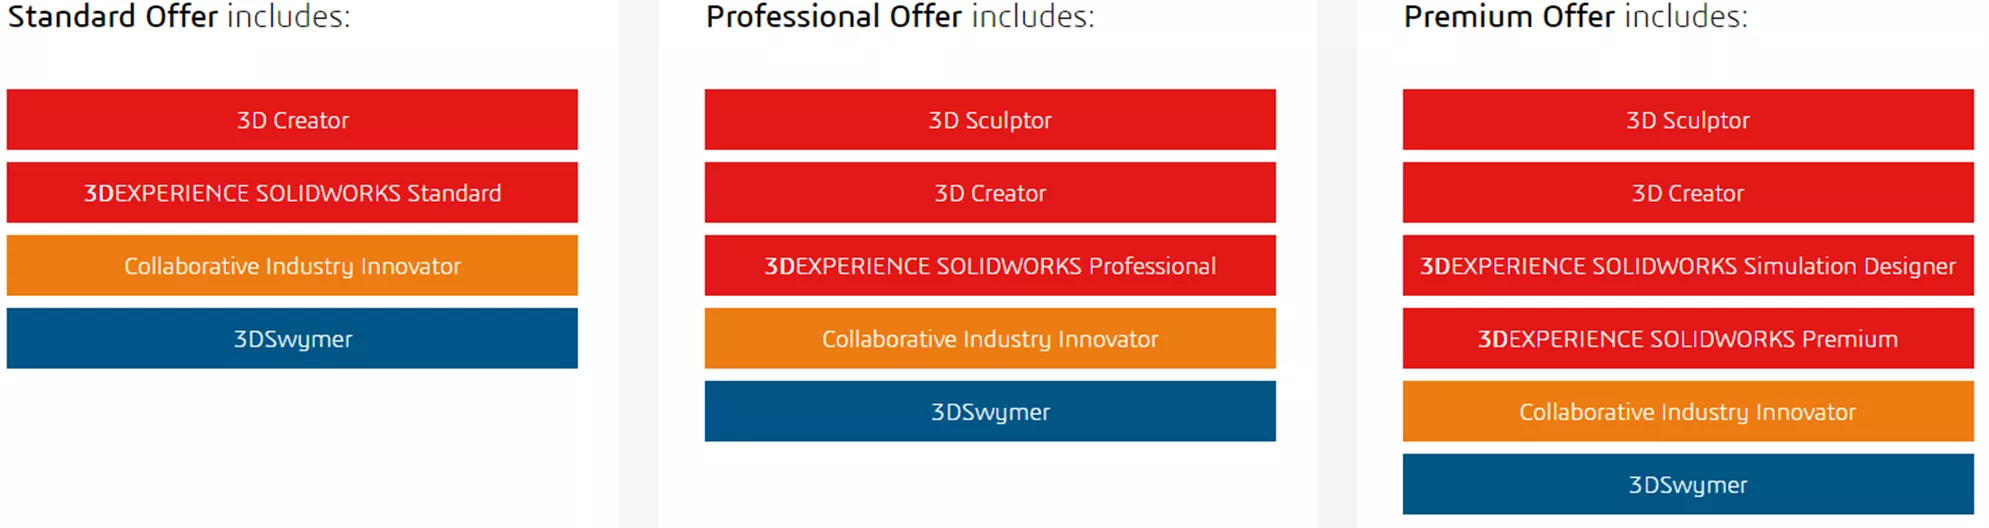 3DEXPERIENCE SOLIDWORKS Standard, Professional, and Premium Differences